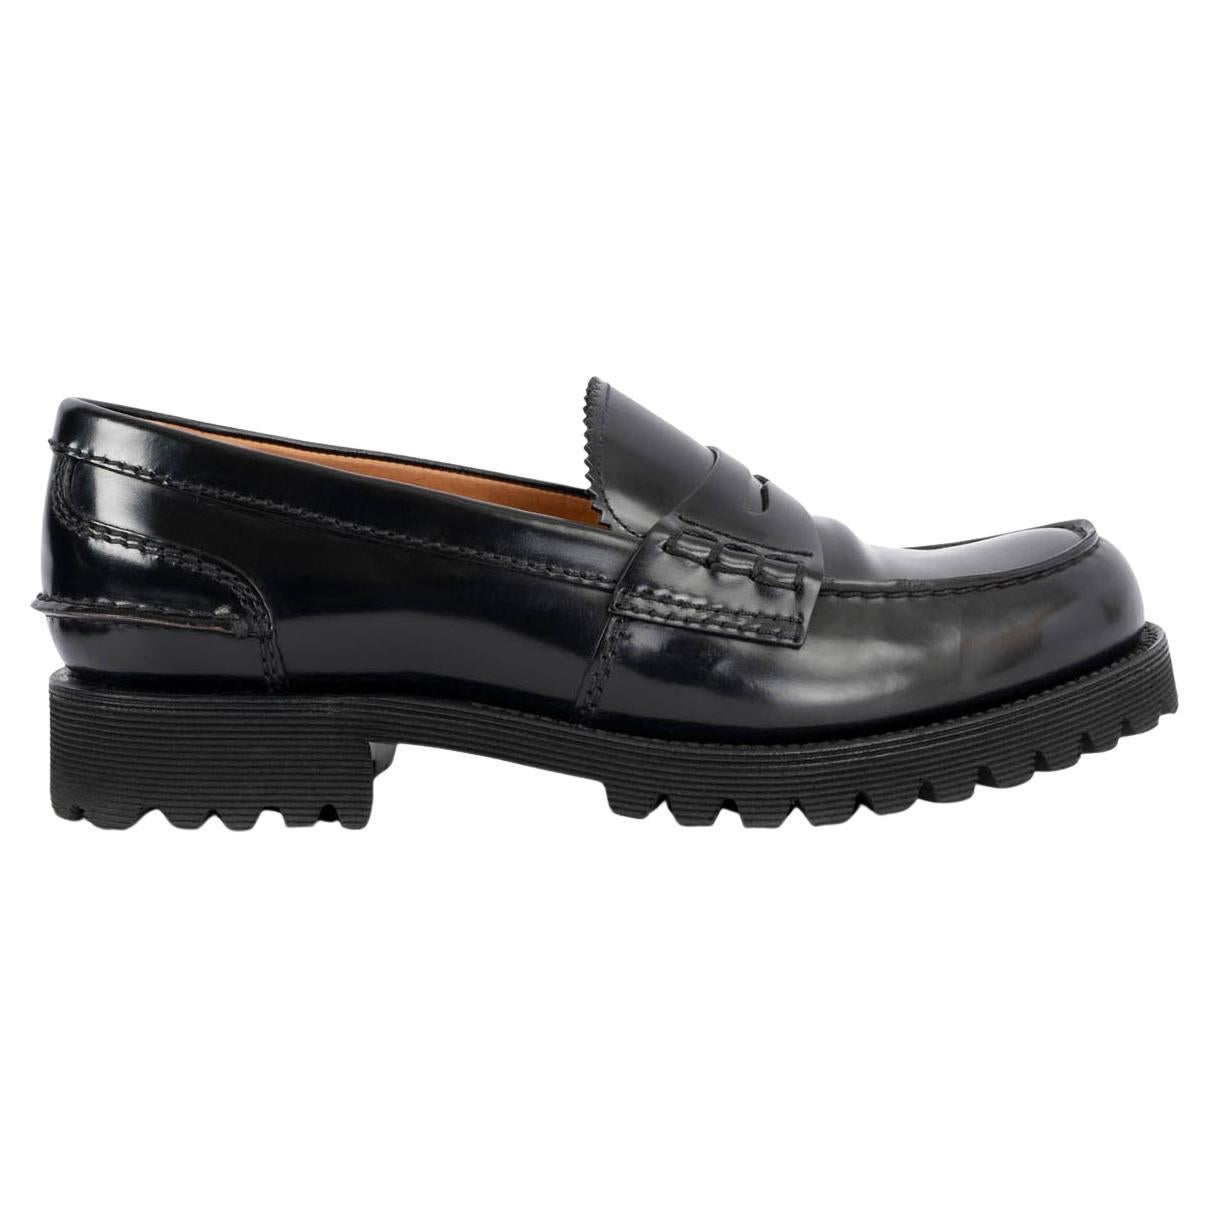 CHURCH'S black shiny leather CHUNKY Loafers Flats Shoes 39.5